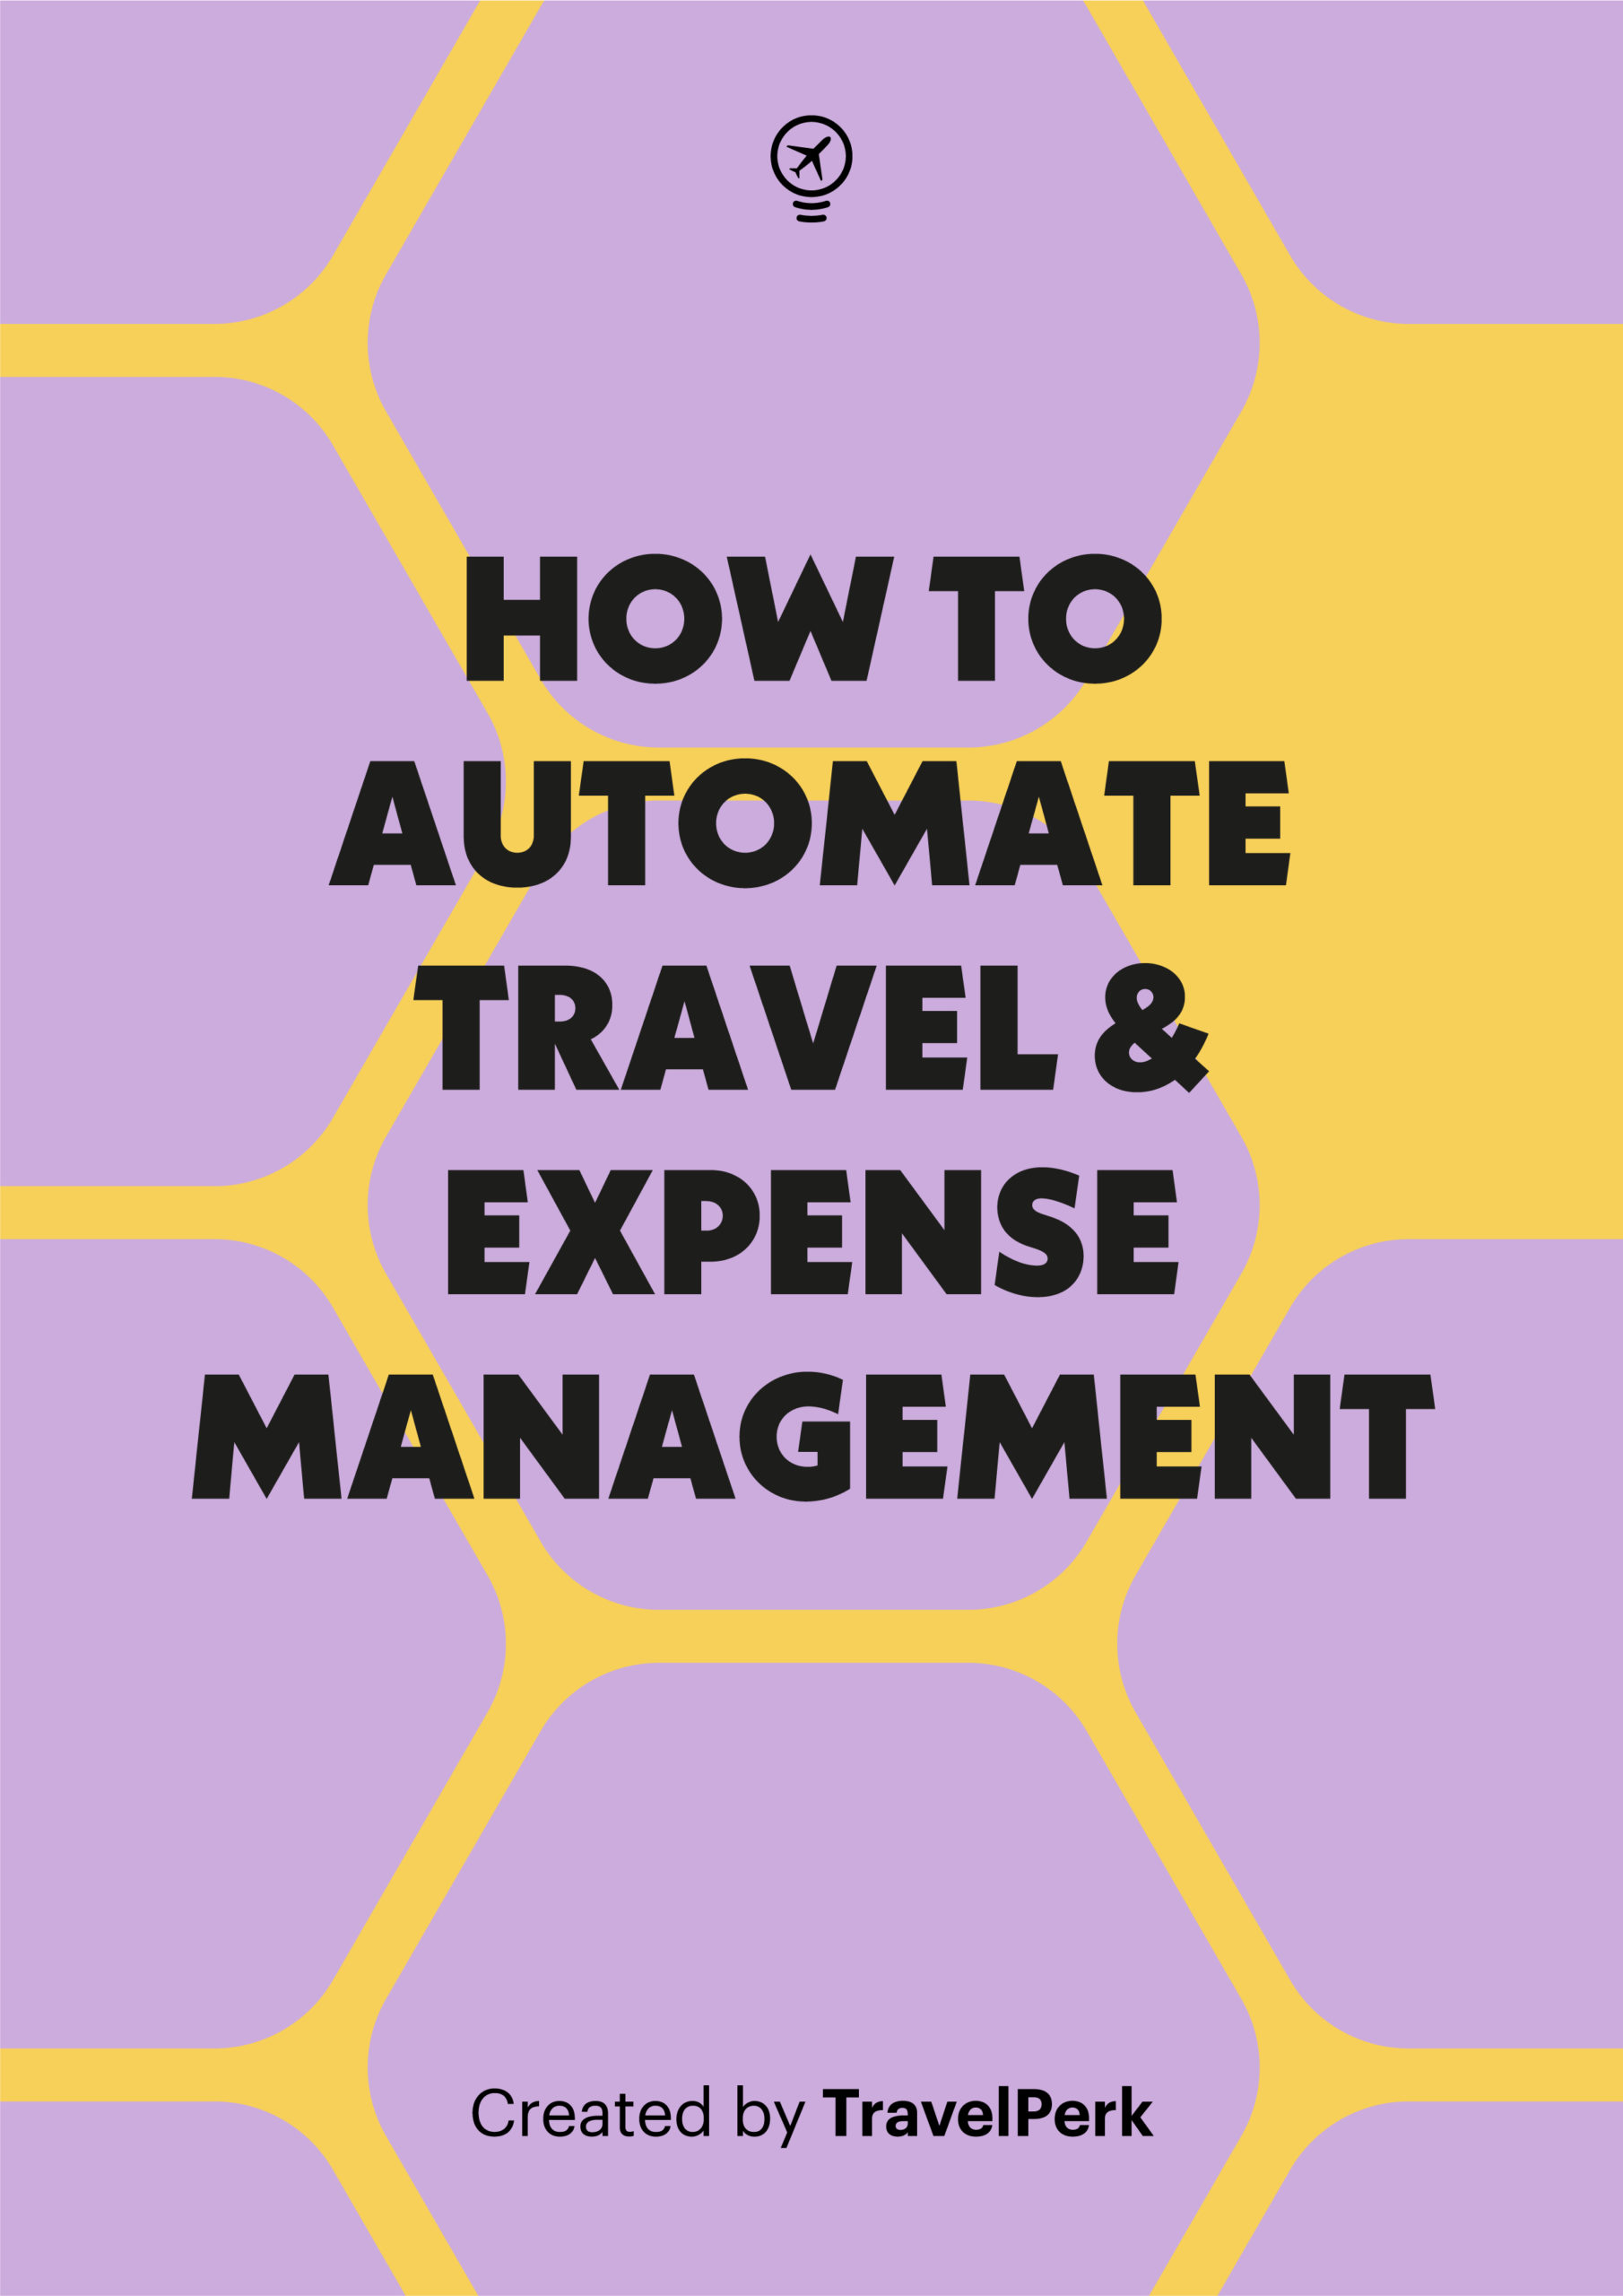 How to automate Travel & Expense Management